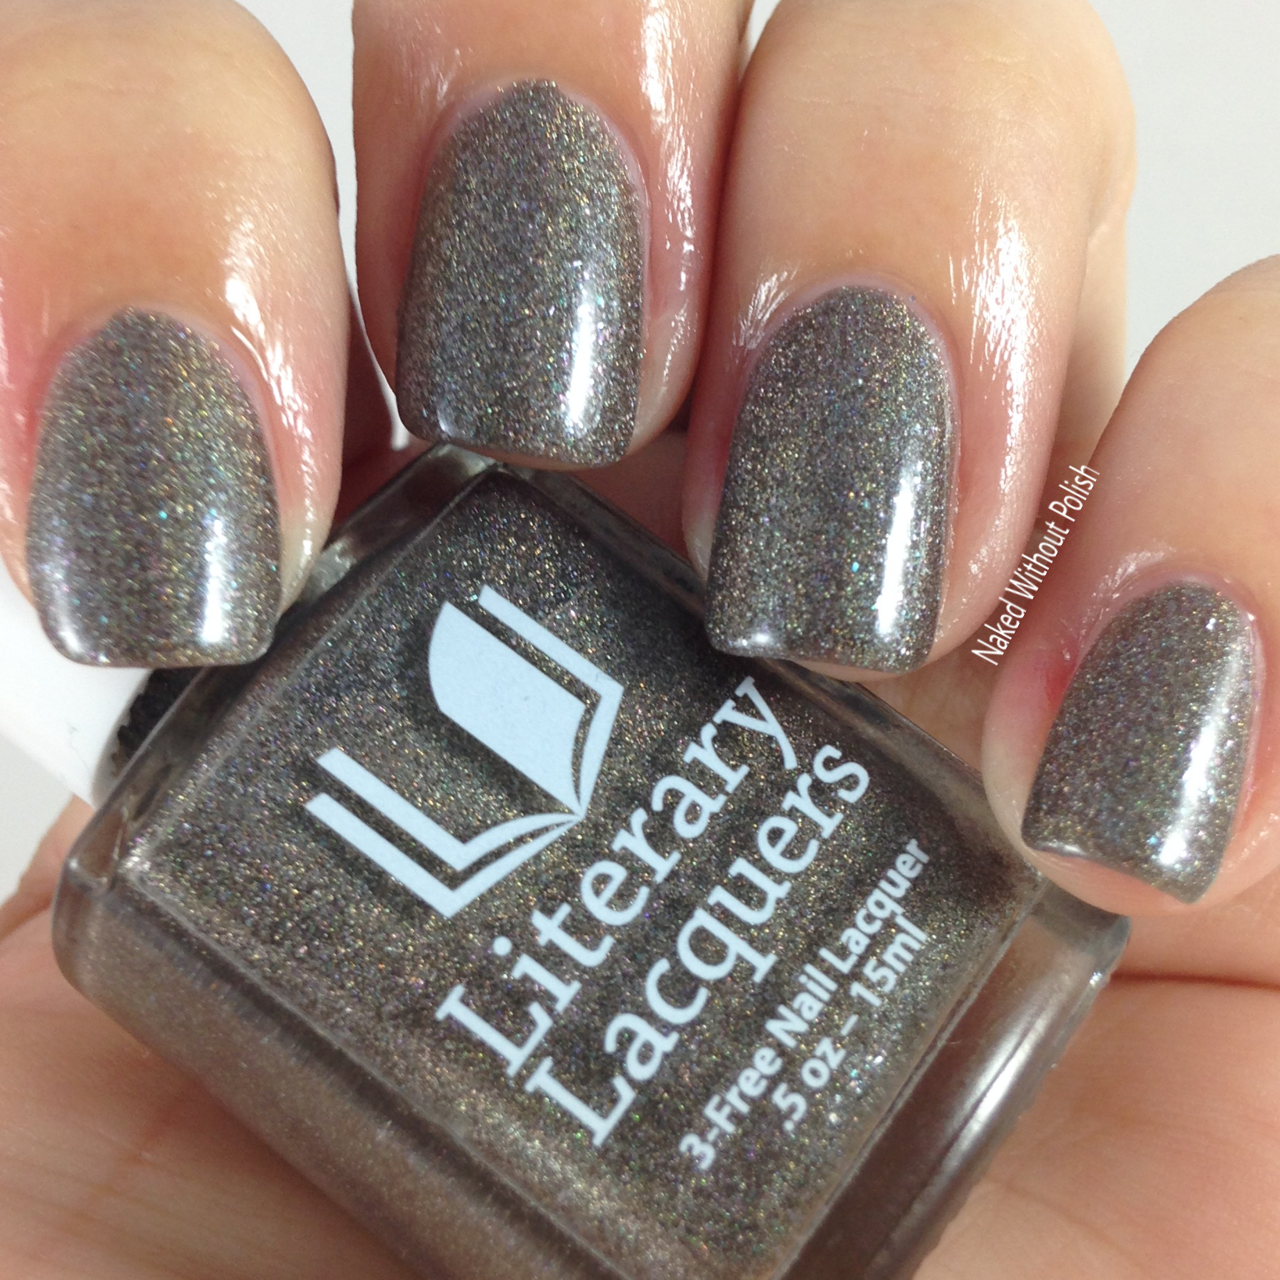 Literary-Lacquers-84-Charing-Cross-Road-5